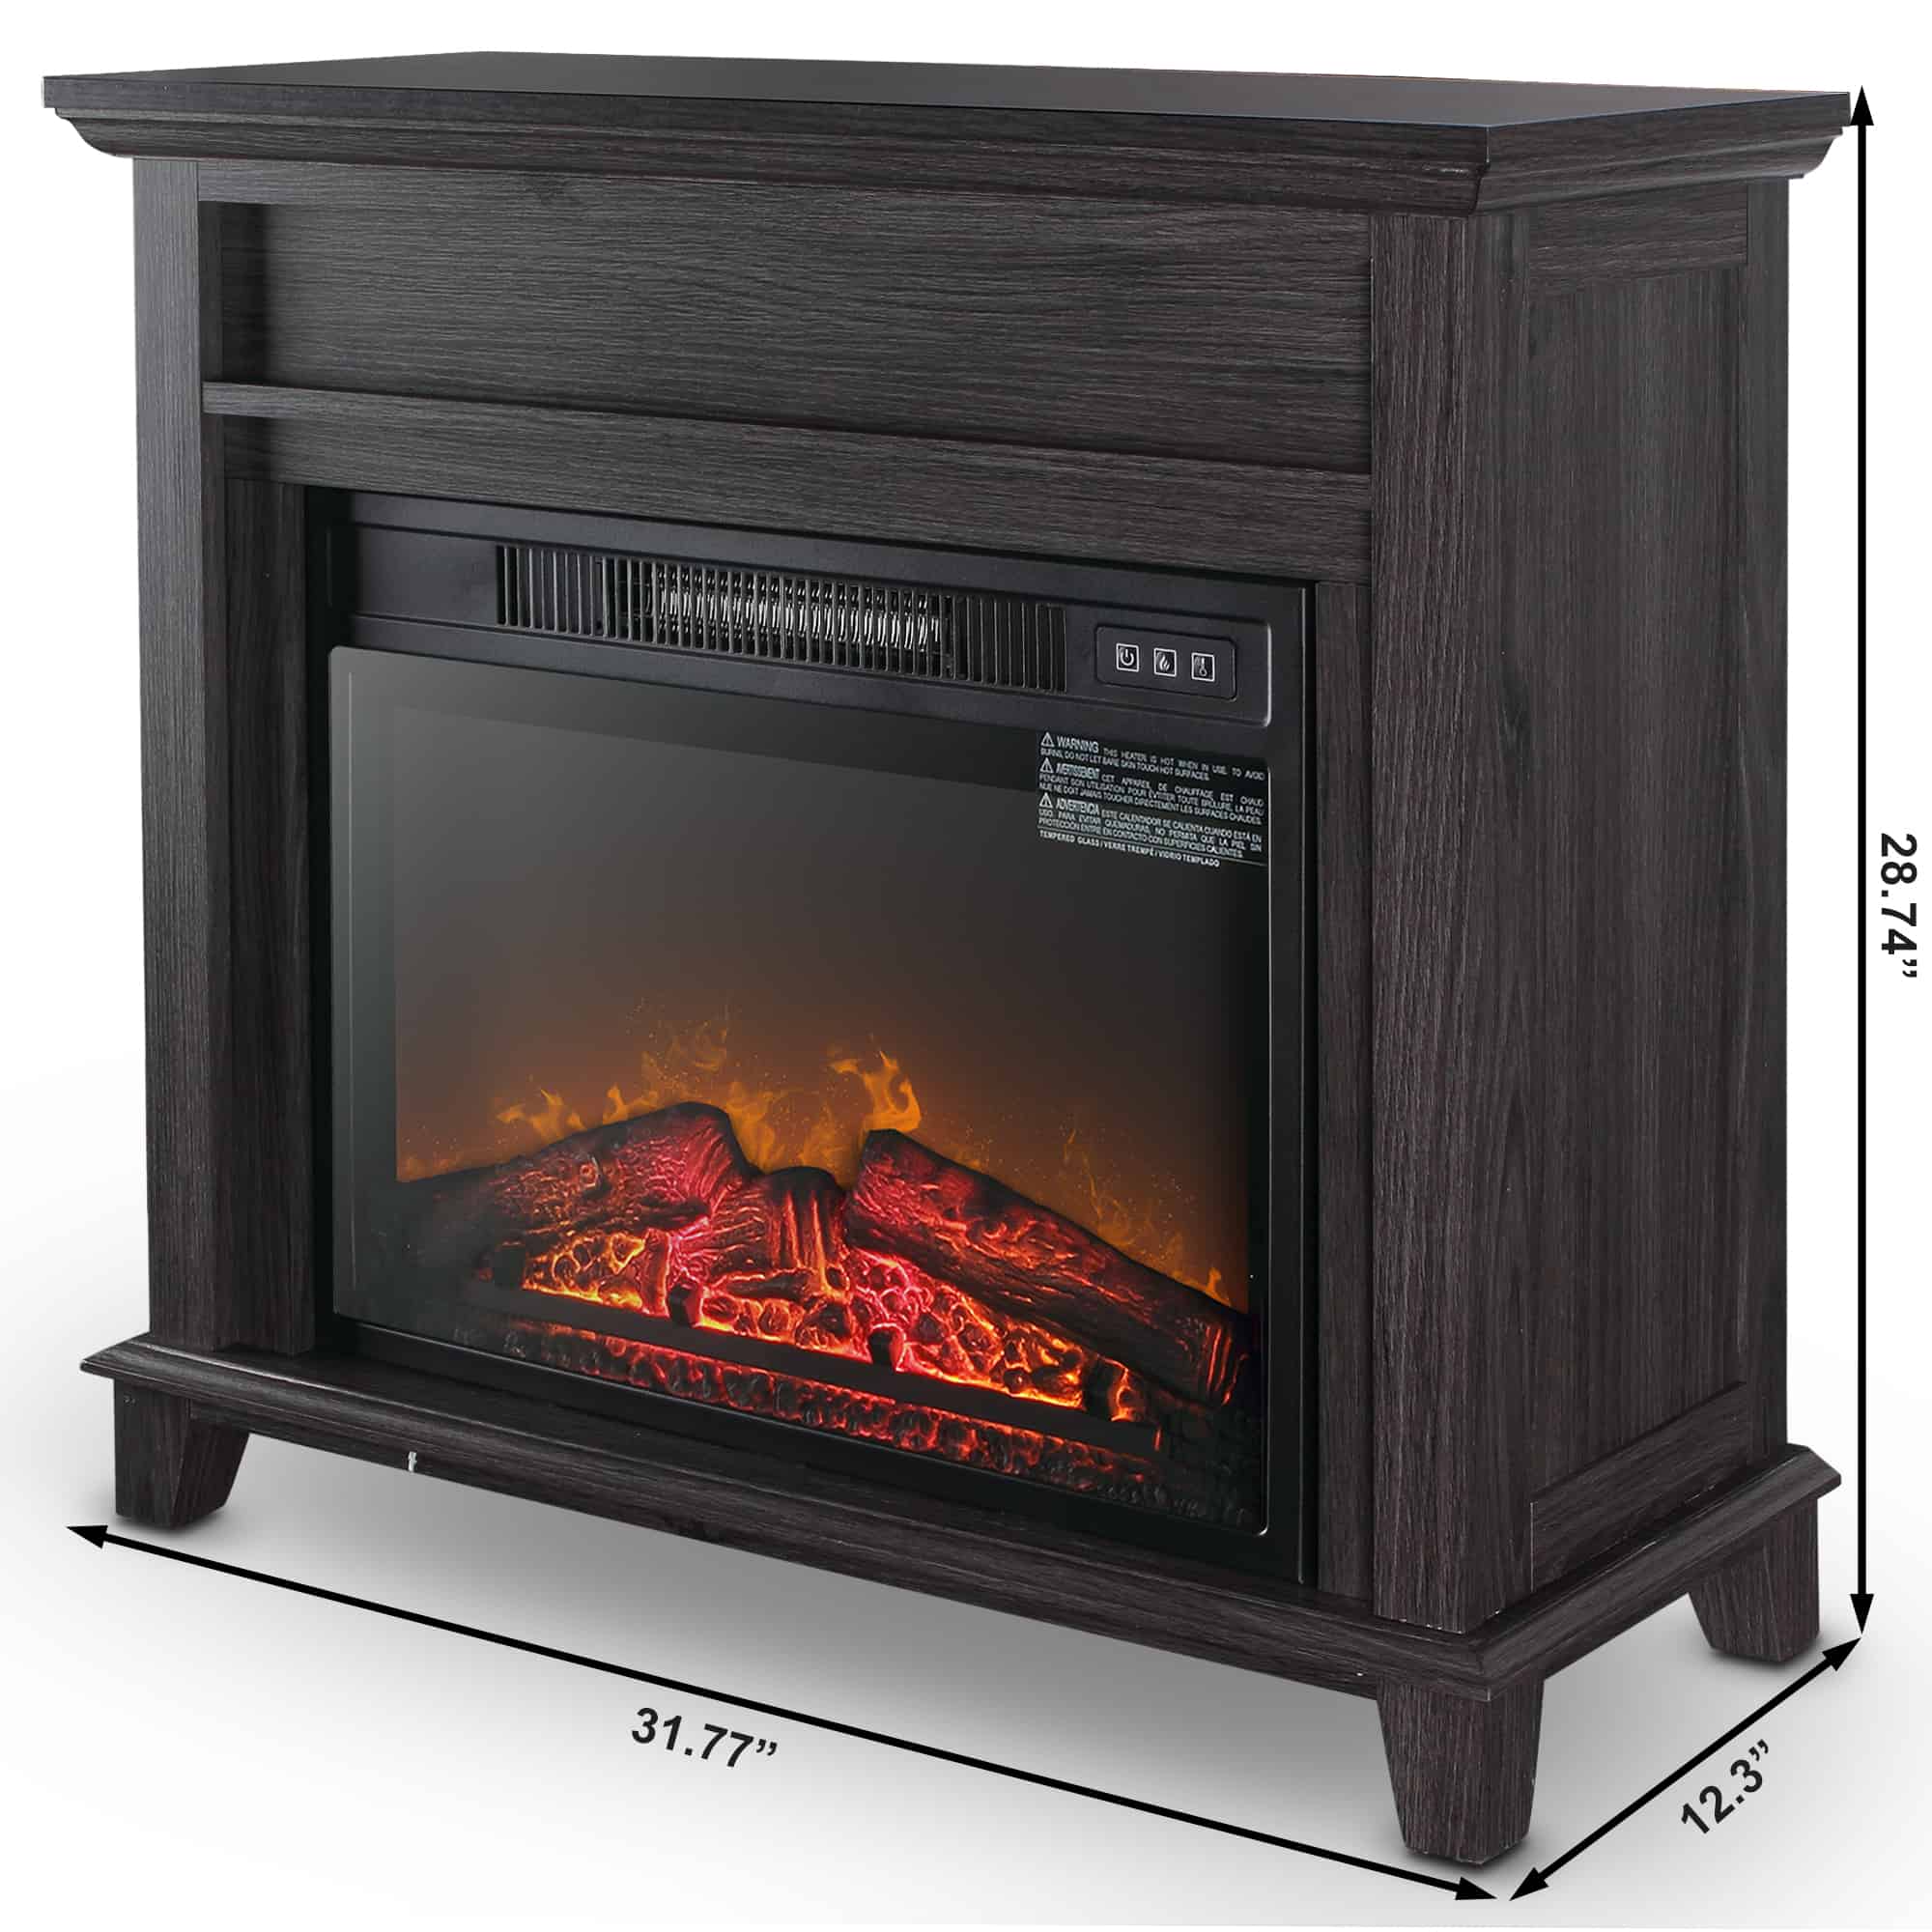 Colour: Black Klarstein Bormio S Electric Fireplace Open Window Detection Storage Space for Logs Weekly Timer Remote Control 2 Heat Settings: 950/1900 W Thermostat Realistic Flame Effects